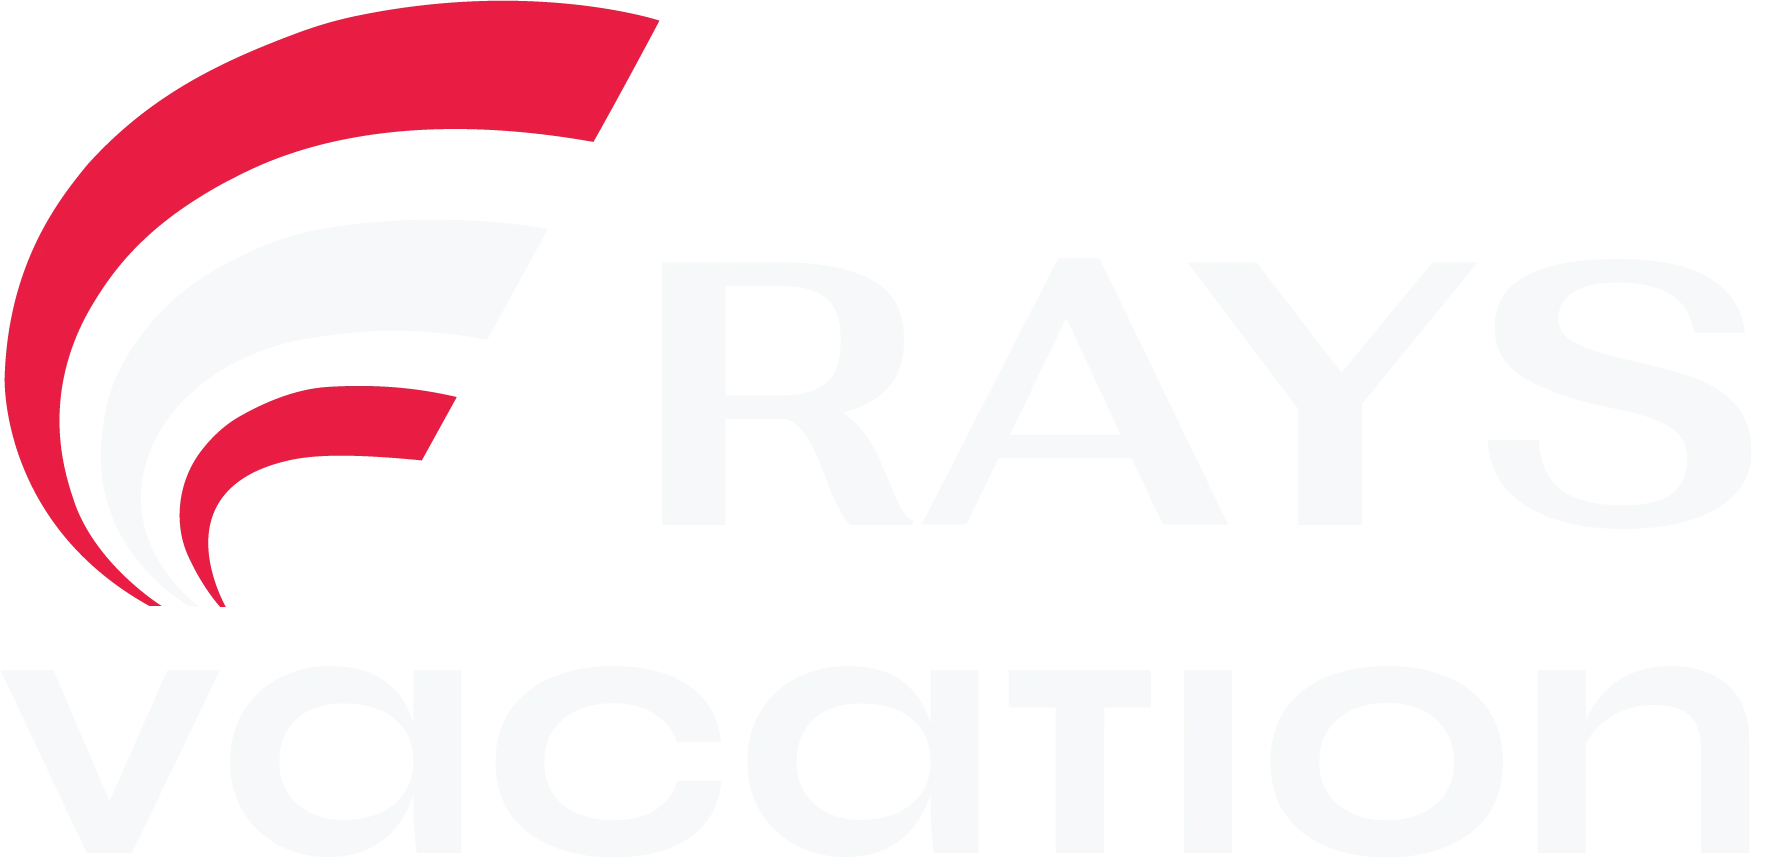 Rays Vacation | Permit & License - Rays Vacation